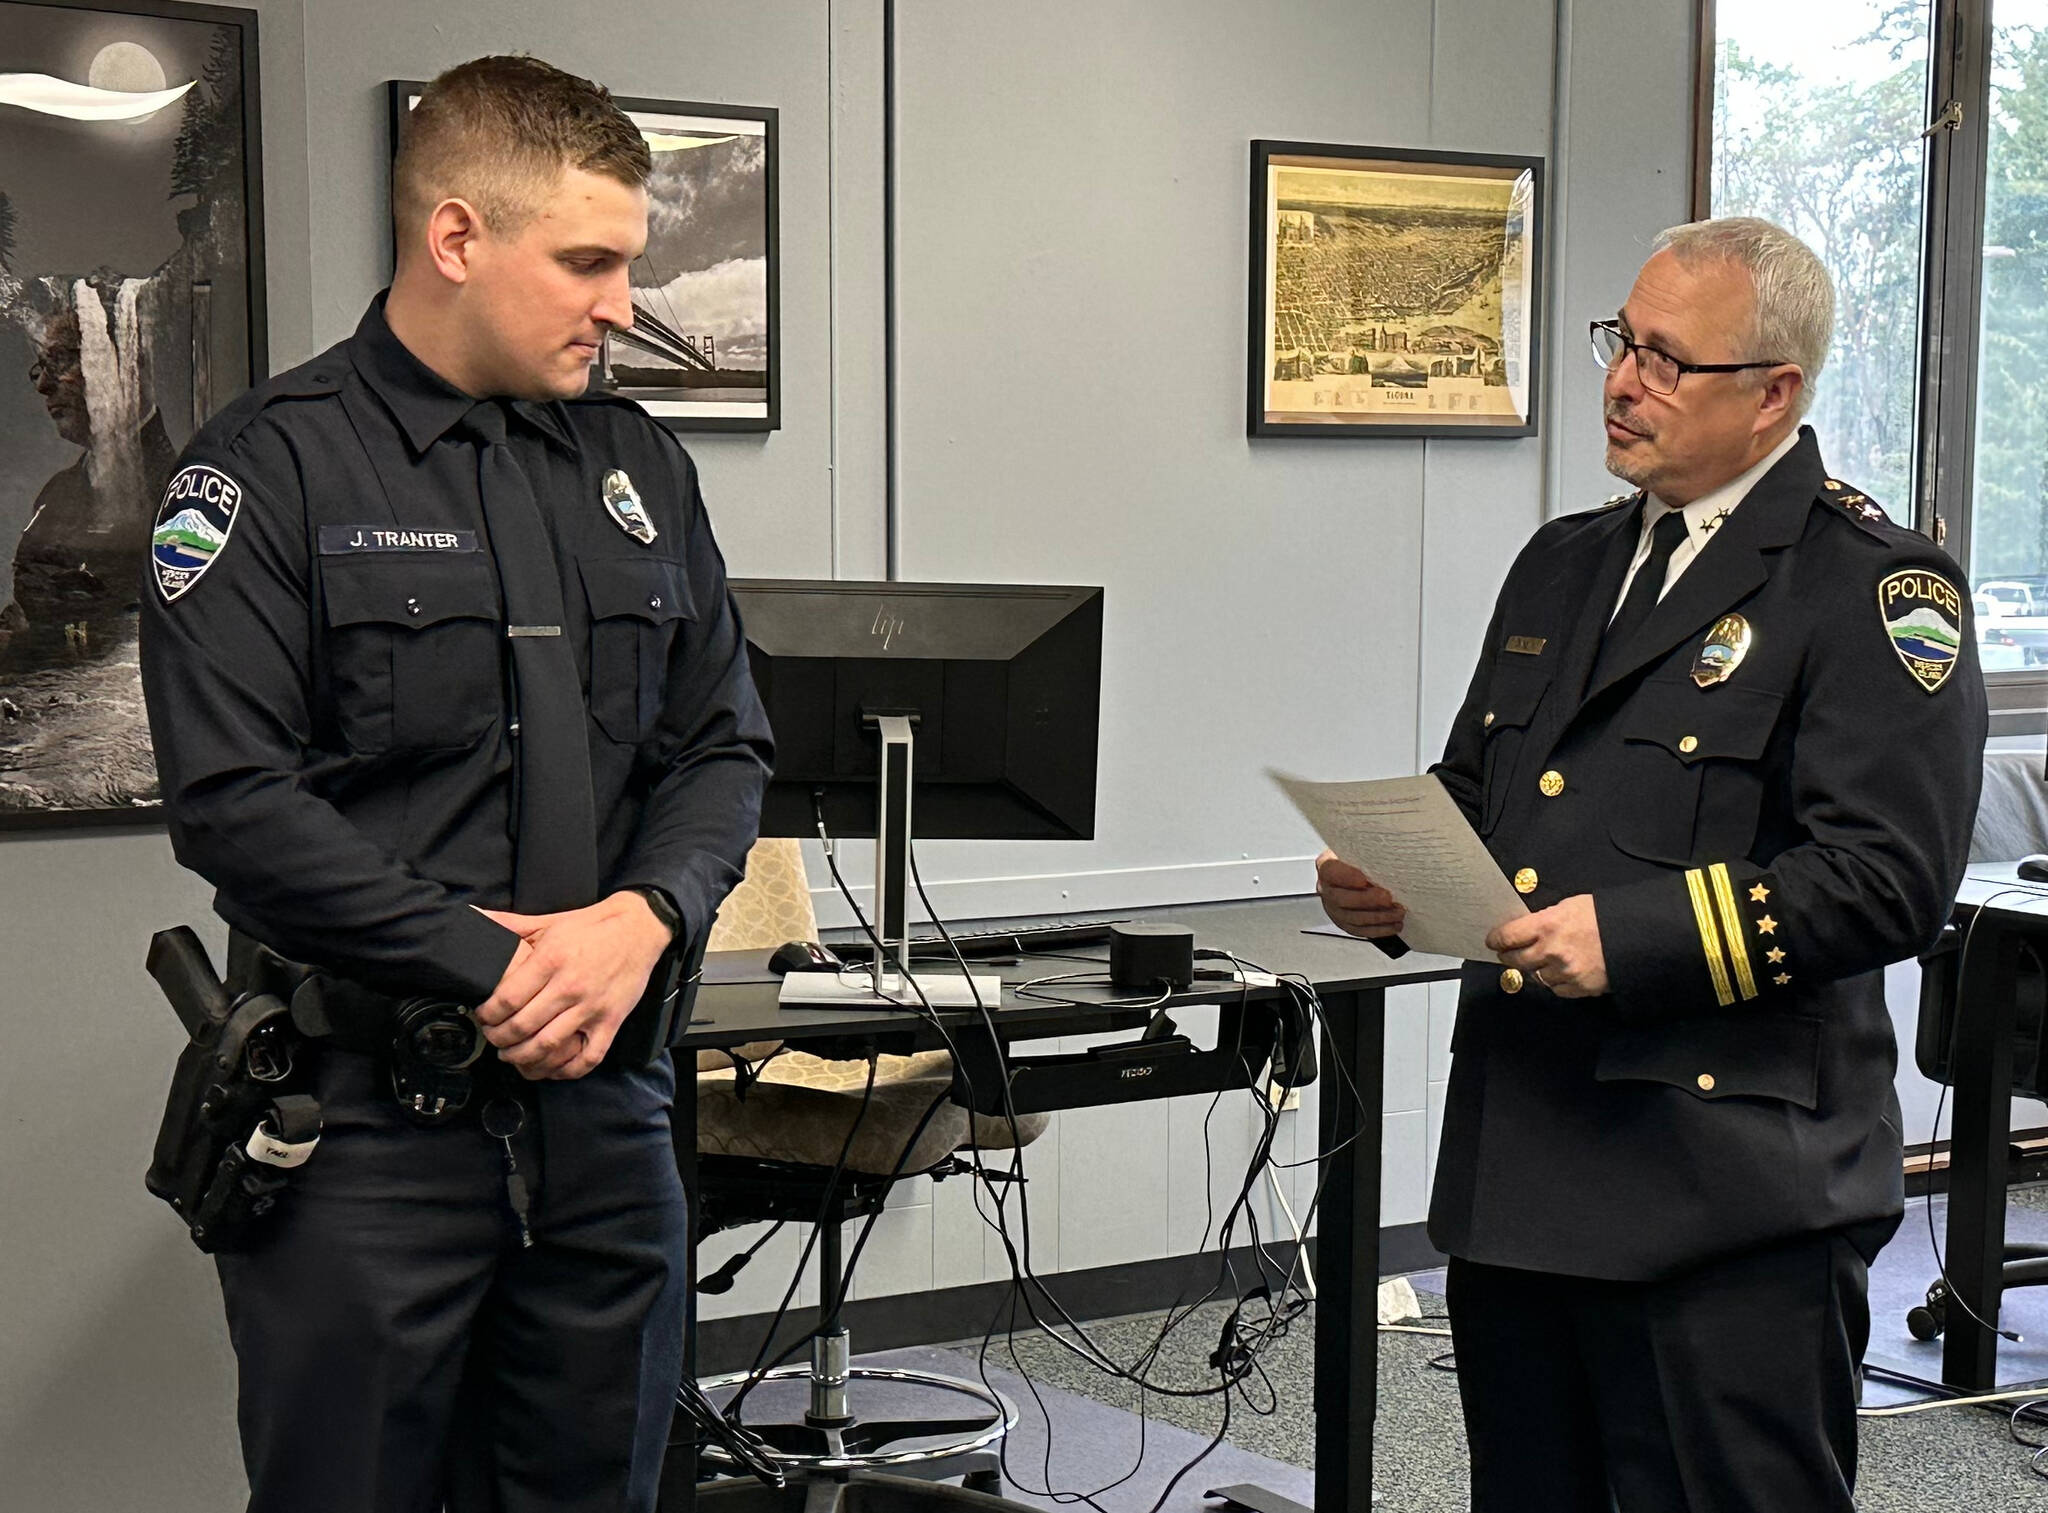 New Mercer Island Police Department officer Jordan Tranter graduated from the law enforcement academy and was sworn in by commander Jeff Magnan on Feb. 6 as police chaplain Greg Asimakoupoulos looked on. The chaplain was a college classmate of Tranter’s father 50 years ago. Photo courtesy of Greg Asimakoupoulos